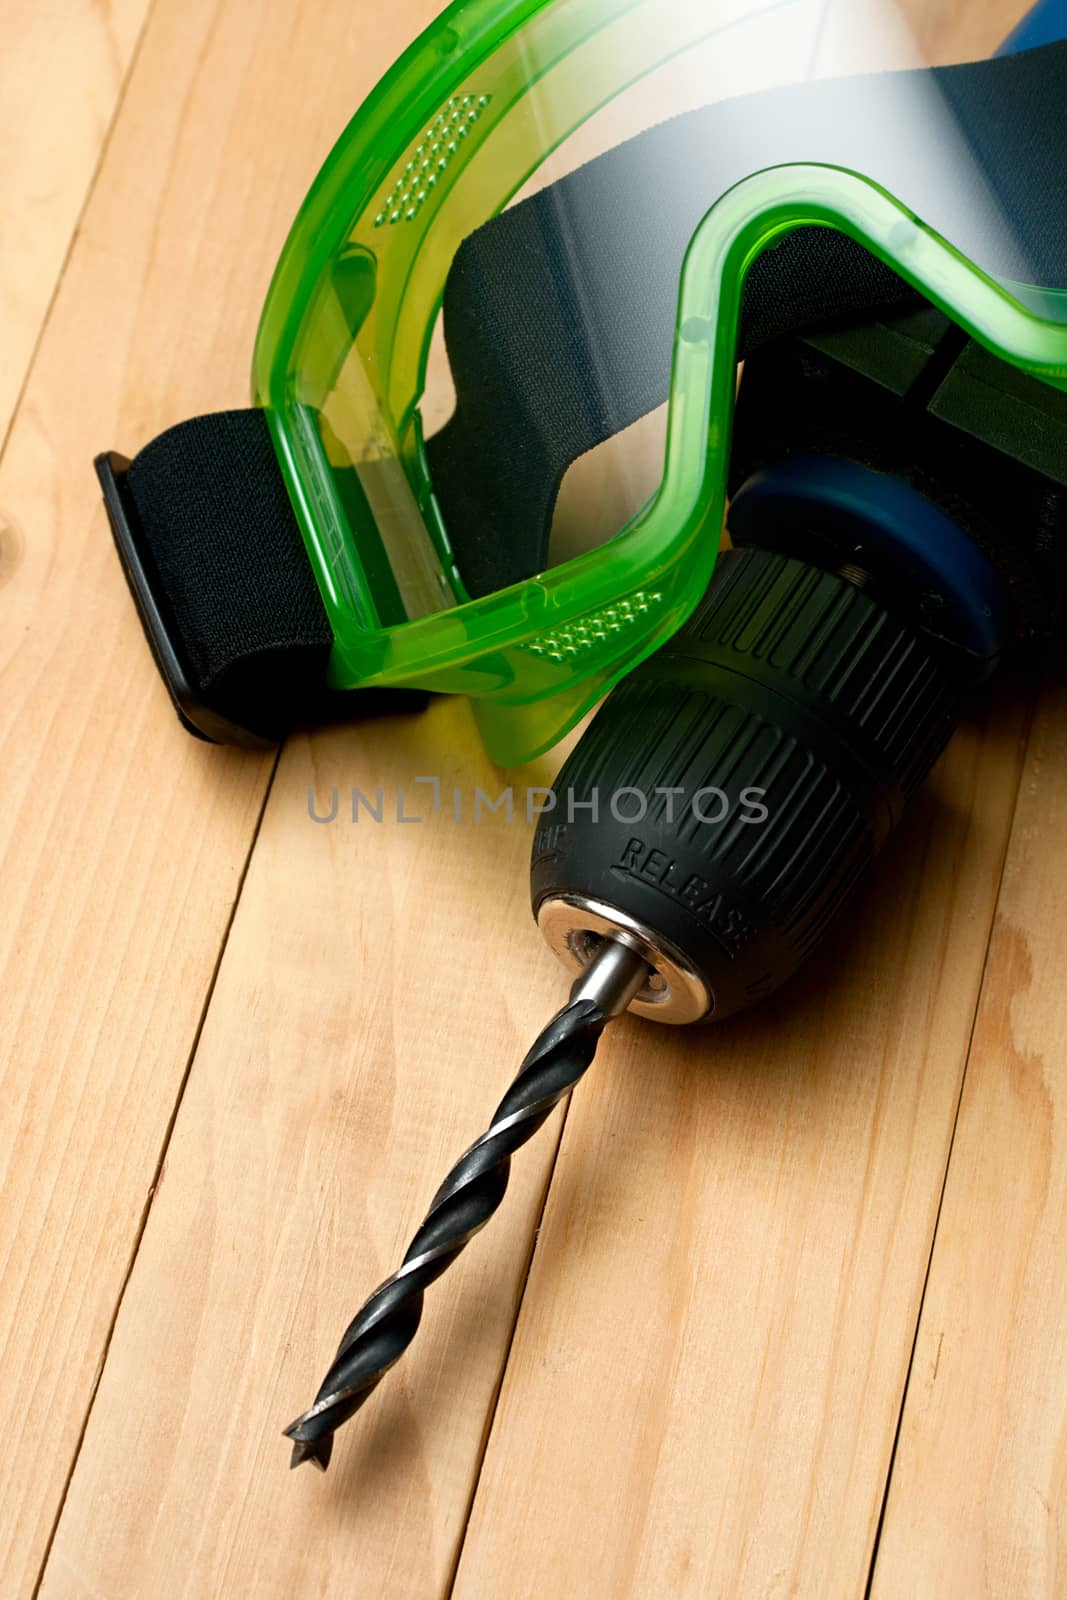 Handdrill and goggles on wooden background by Garsya